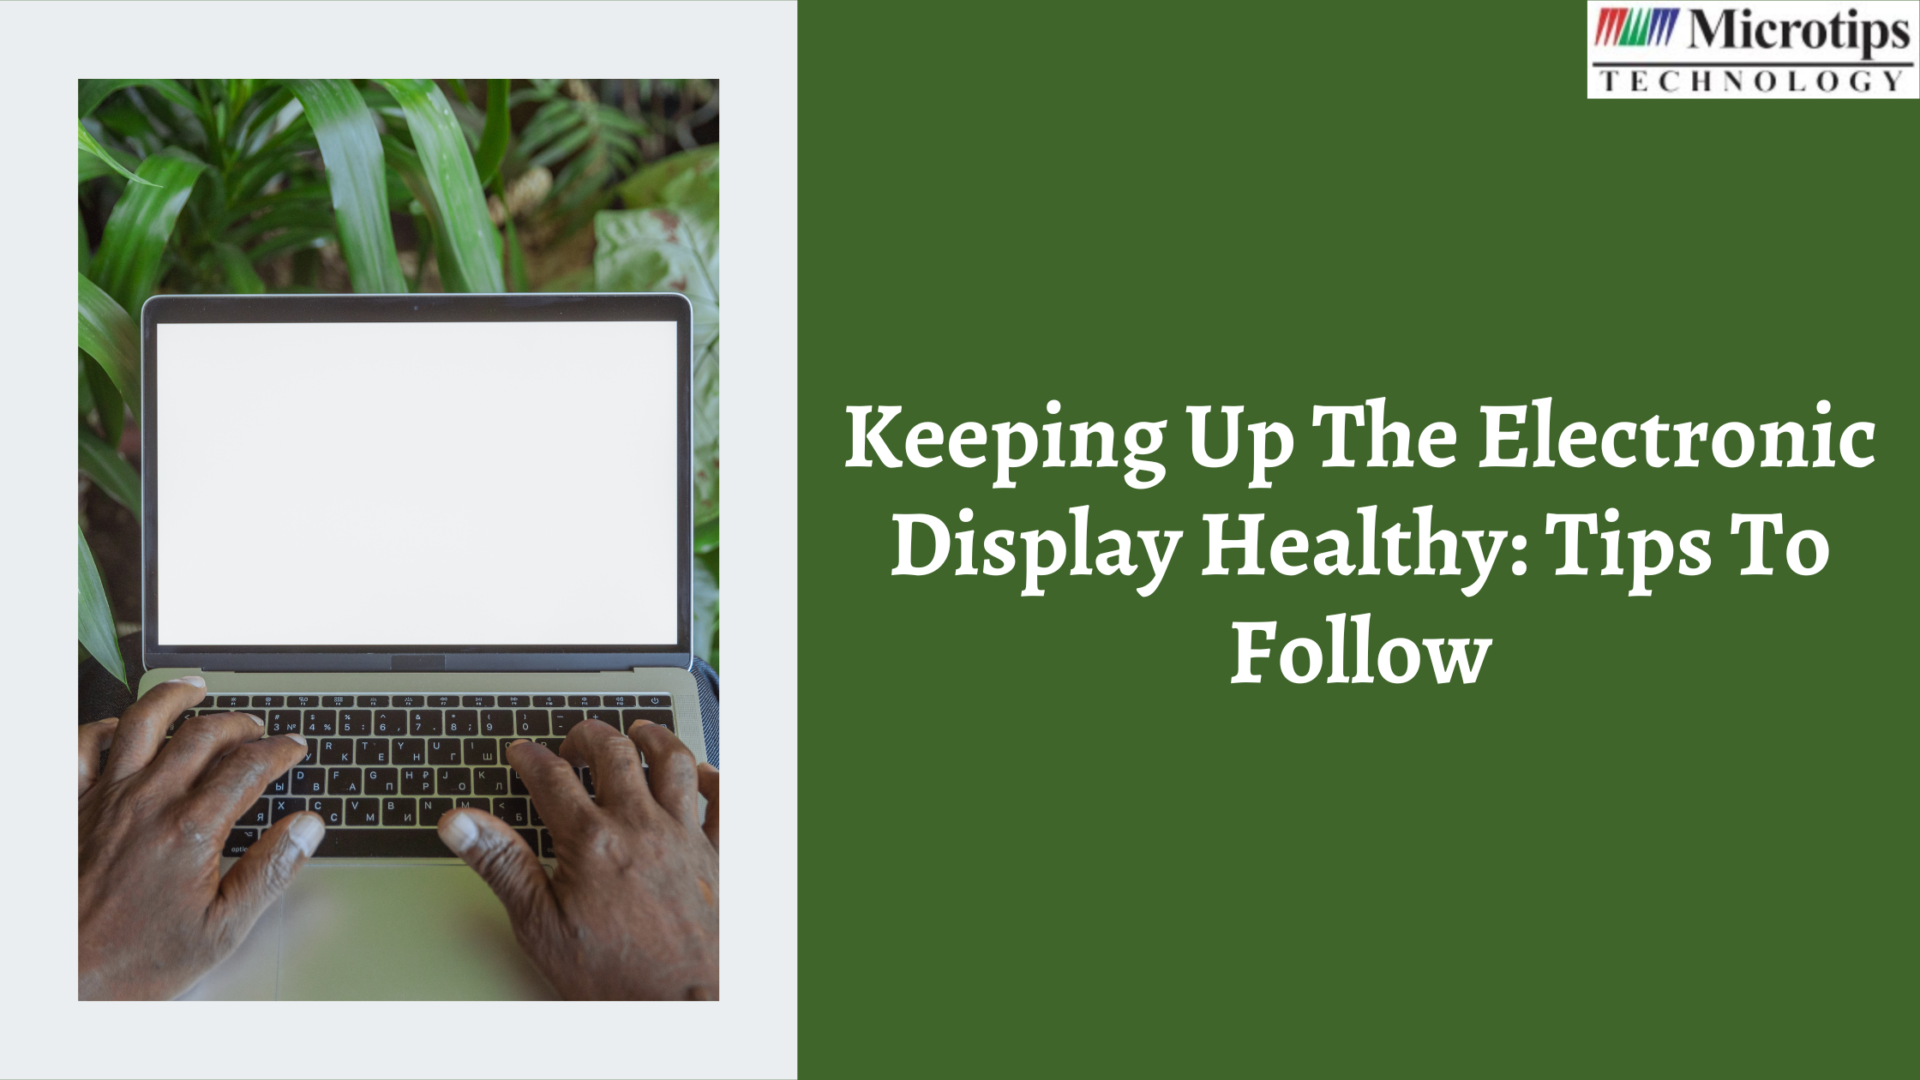 KEEPING UP THE ELECTRONIC DISPLAY HEALTHY: TIPS TO FOLLOW